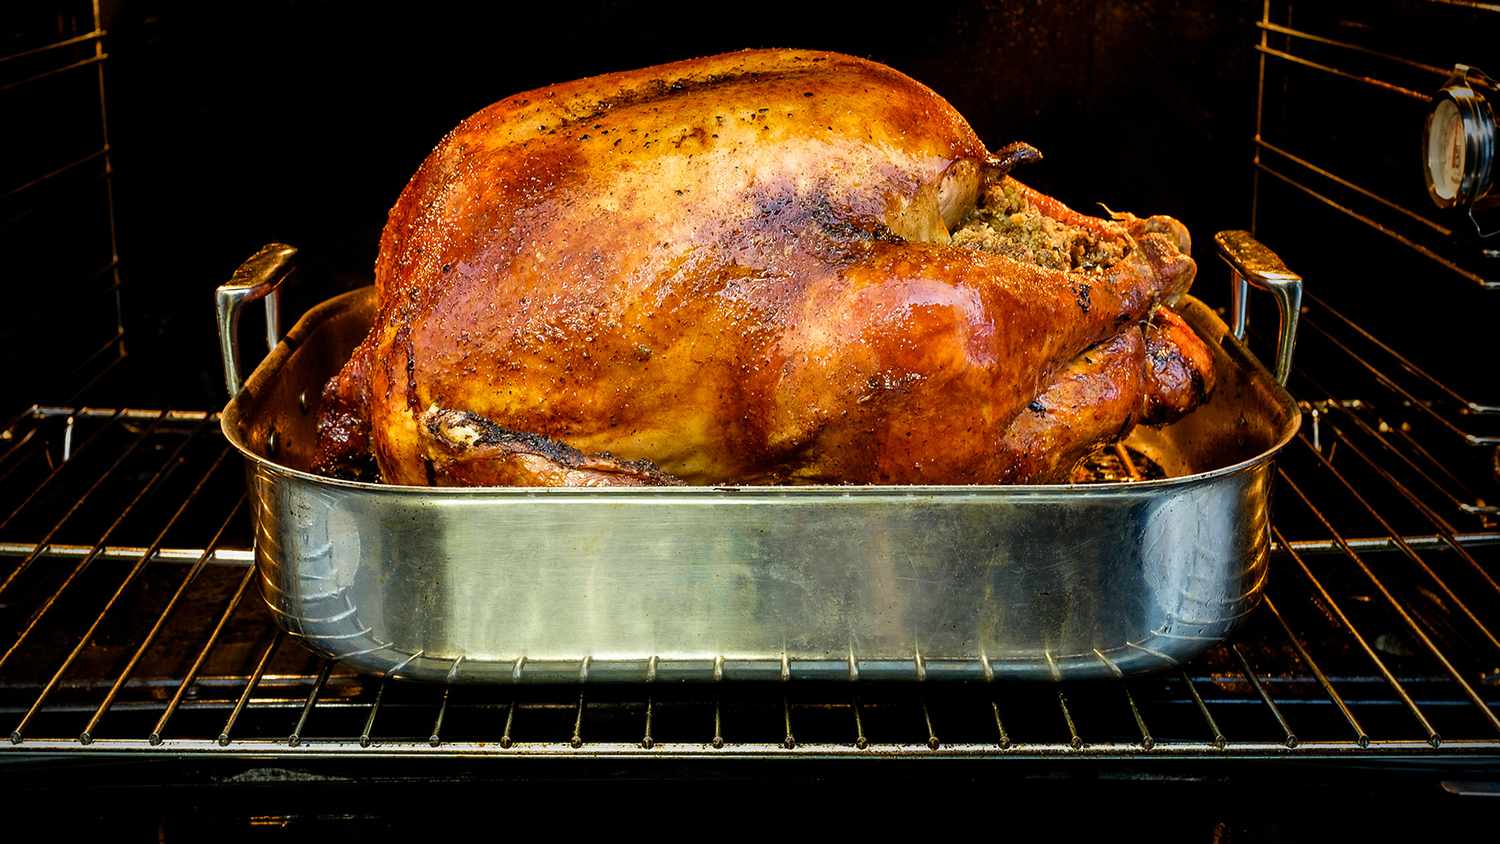 How long should i cook a 17 pound stuffed turkey How Long To Cook A Turkey Chart And Guide Real Simple